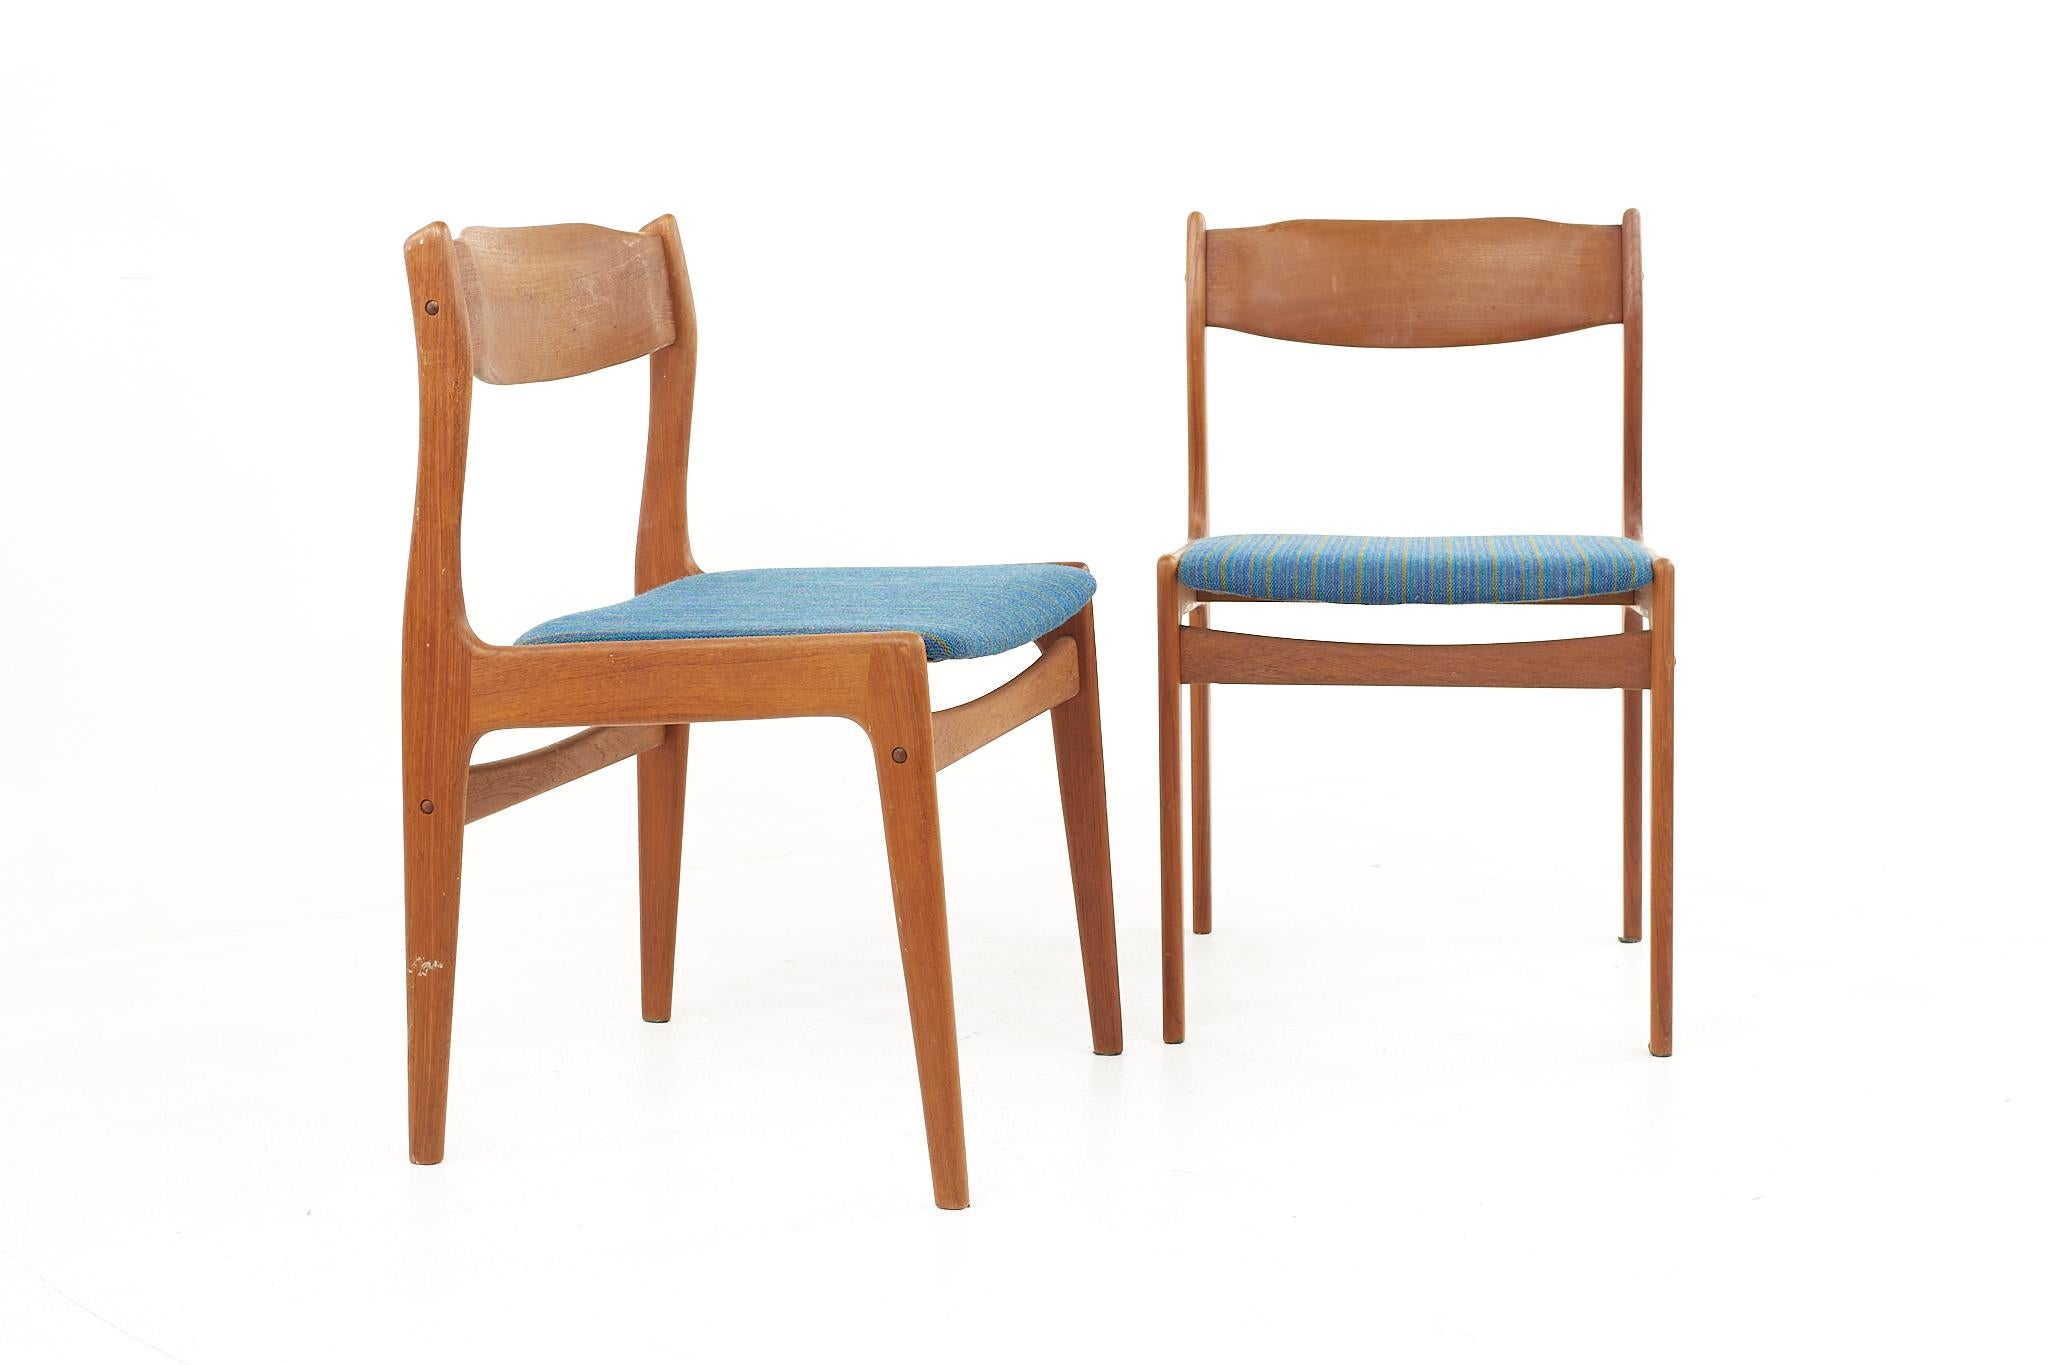 Mid century danish teak side chairs - a pair

Each chair measures: 19 wide x 19 deep x 30.5 high, with a seat height of 17.5 inches 

All pieces of furniture can be had in what we call restored vintage condition. That means the piece is restored